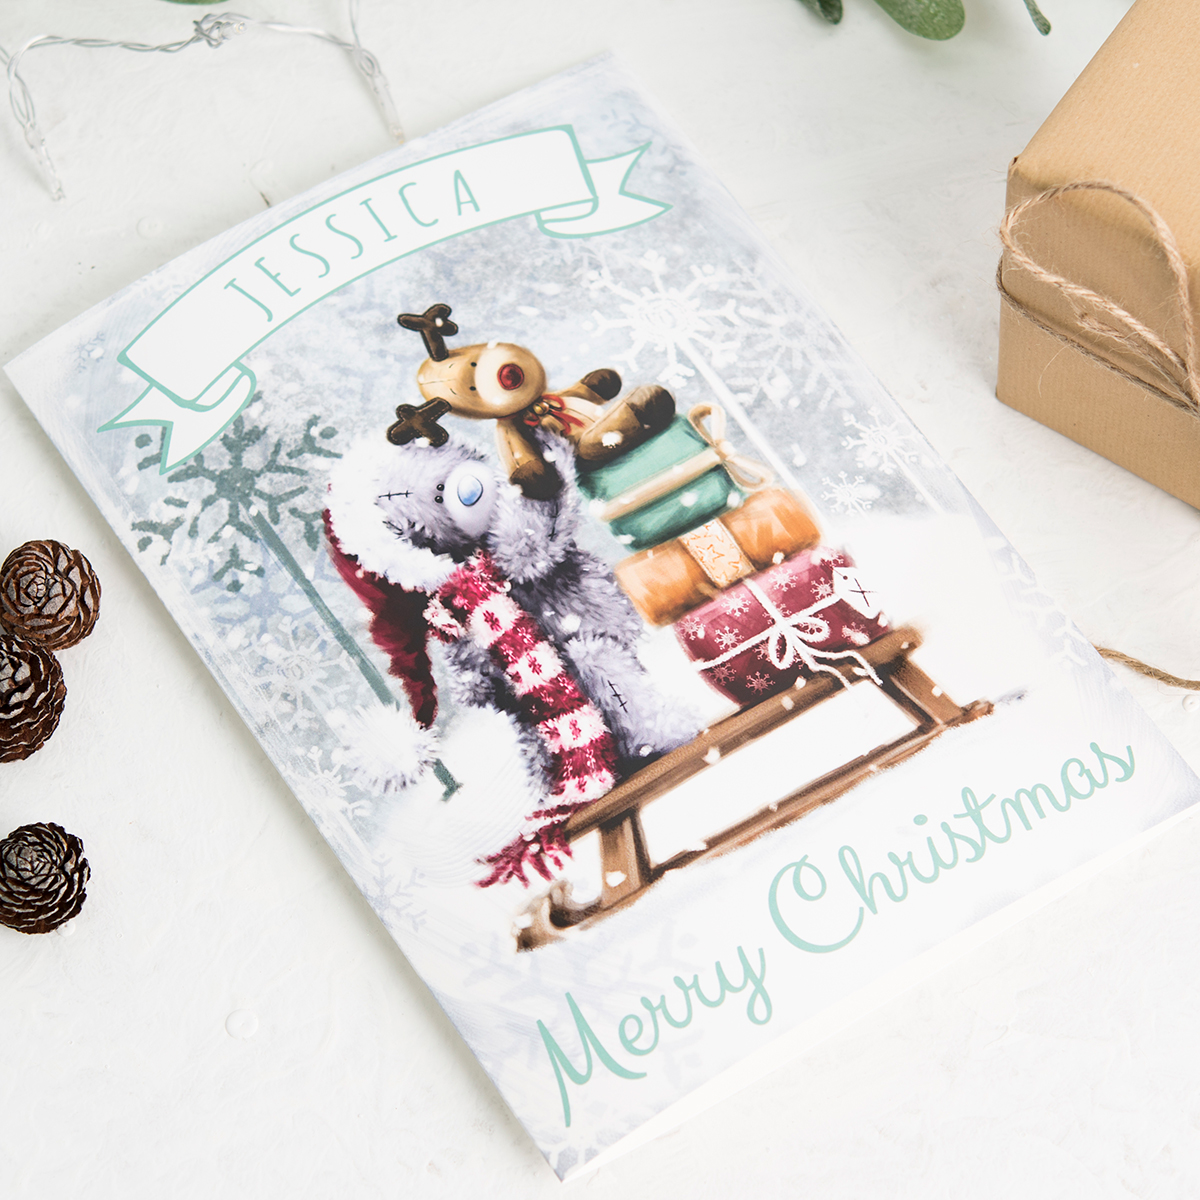 Personalised Me To You Card - Sleigh Christmas